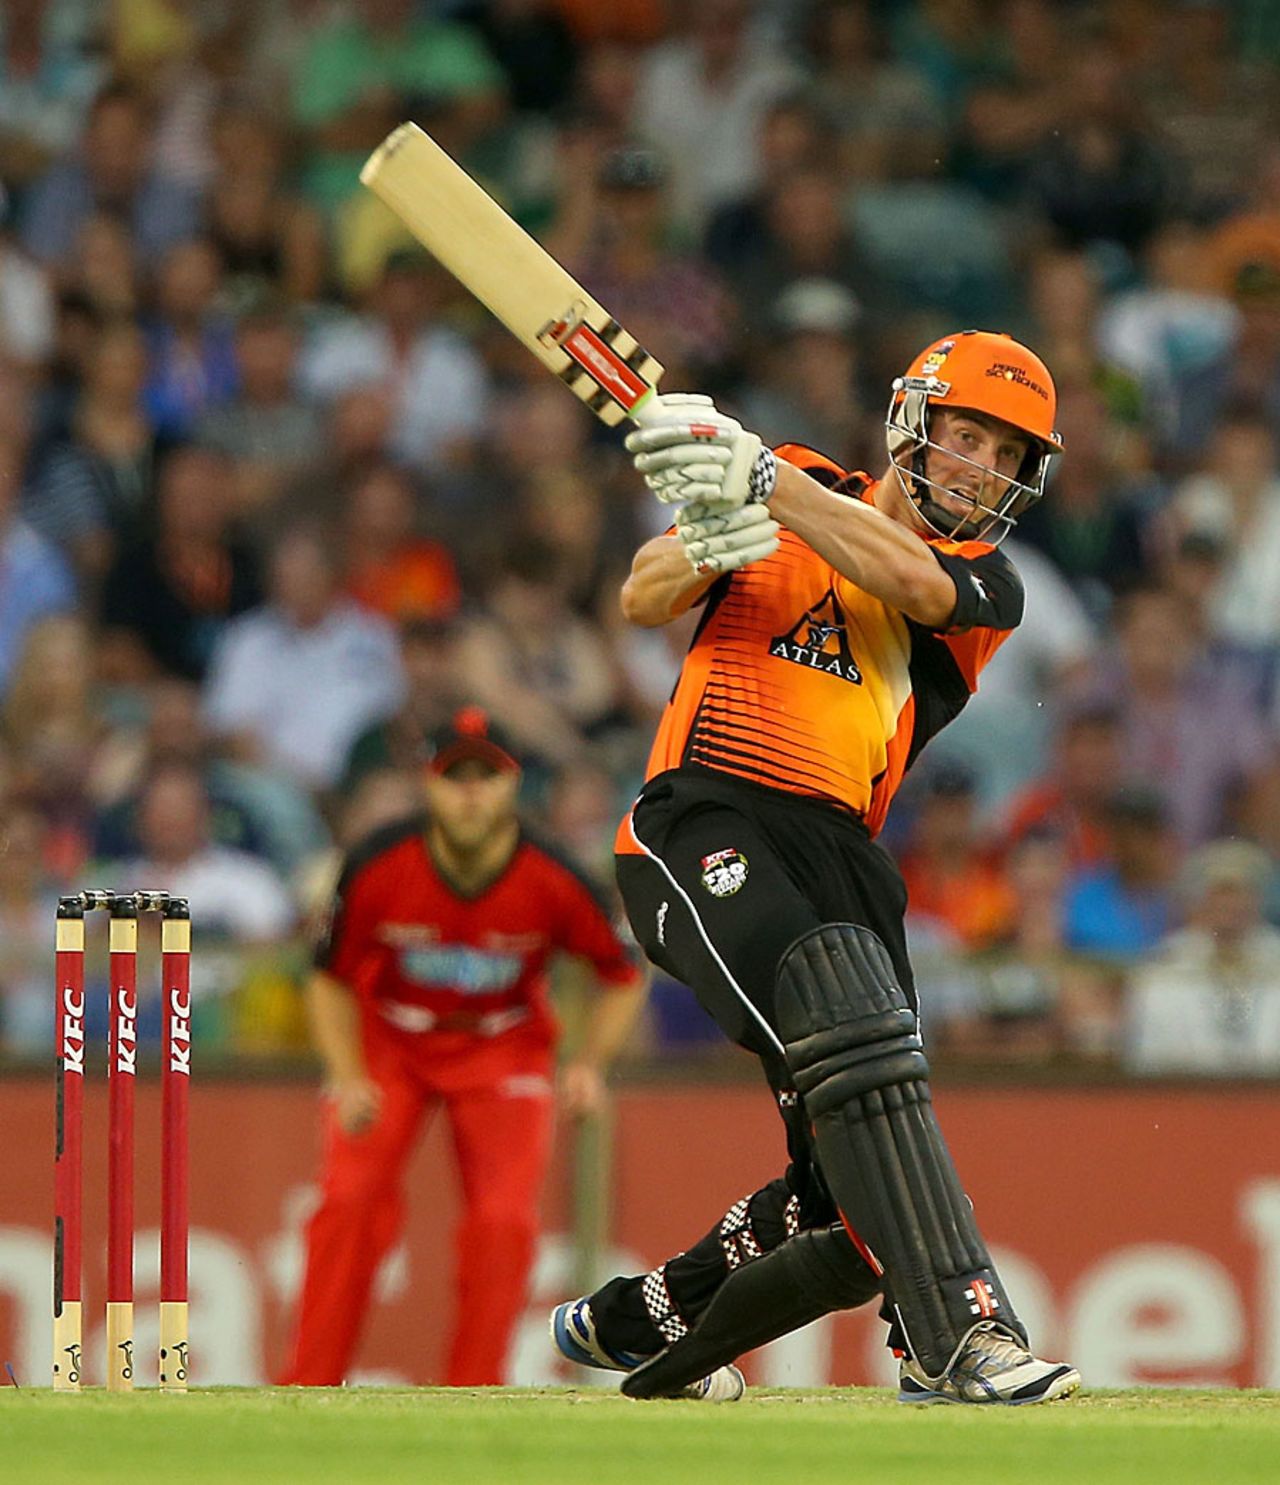 Shaun Marsh goes over the top during his 85, Perth Scorchers v Melbourne Renegades, BBL, Perth, December 29, 2012 